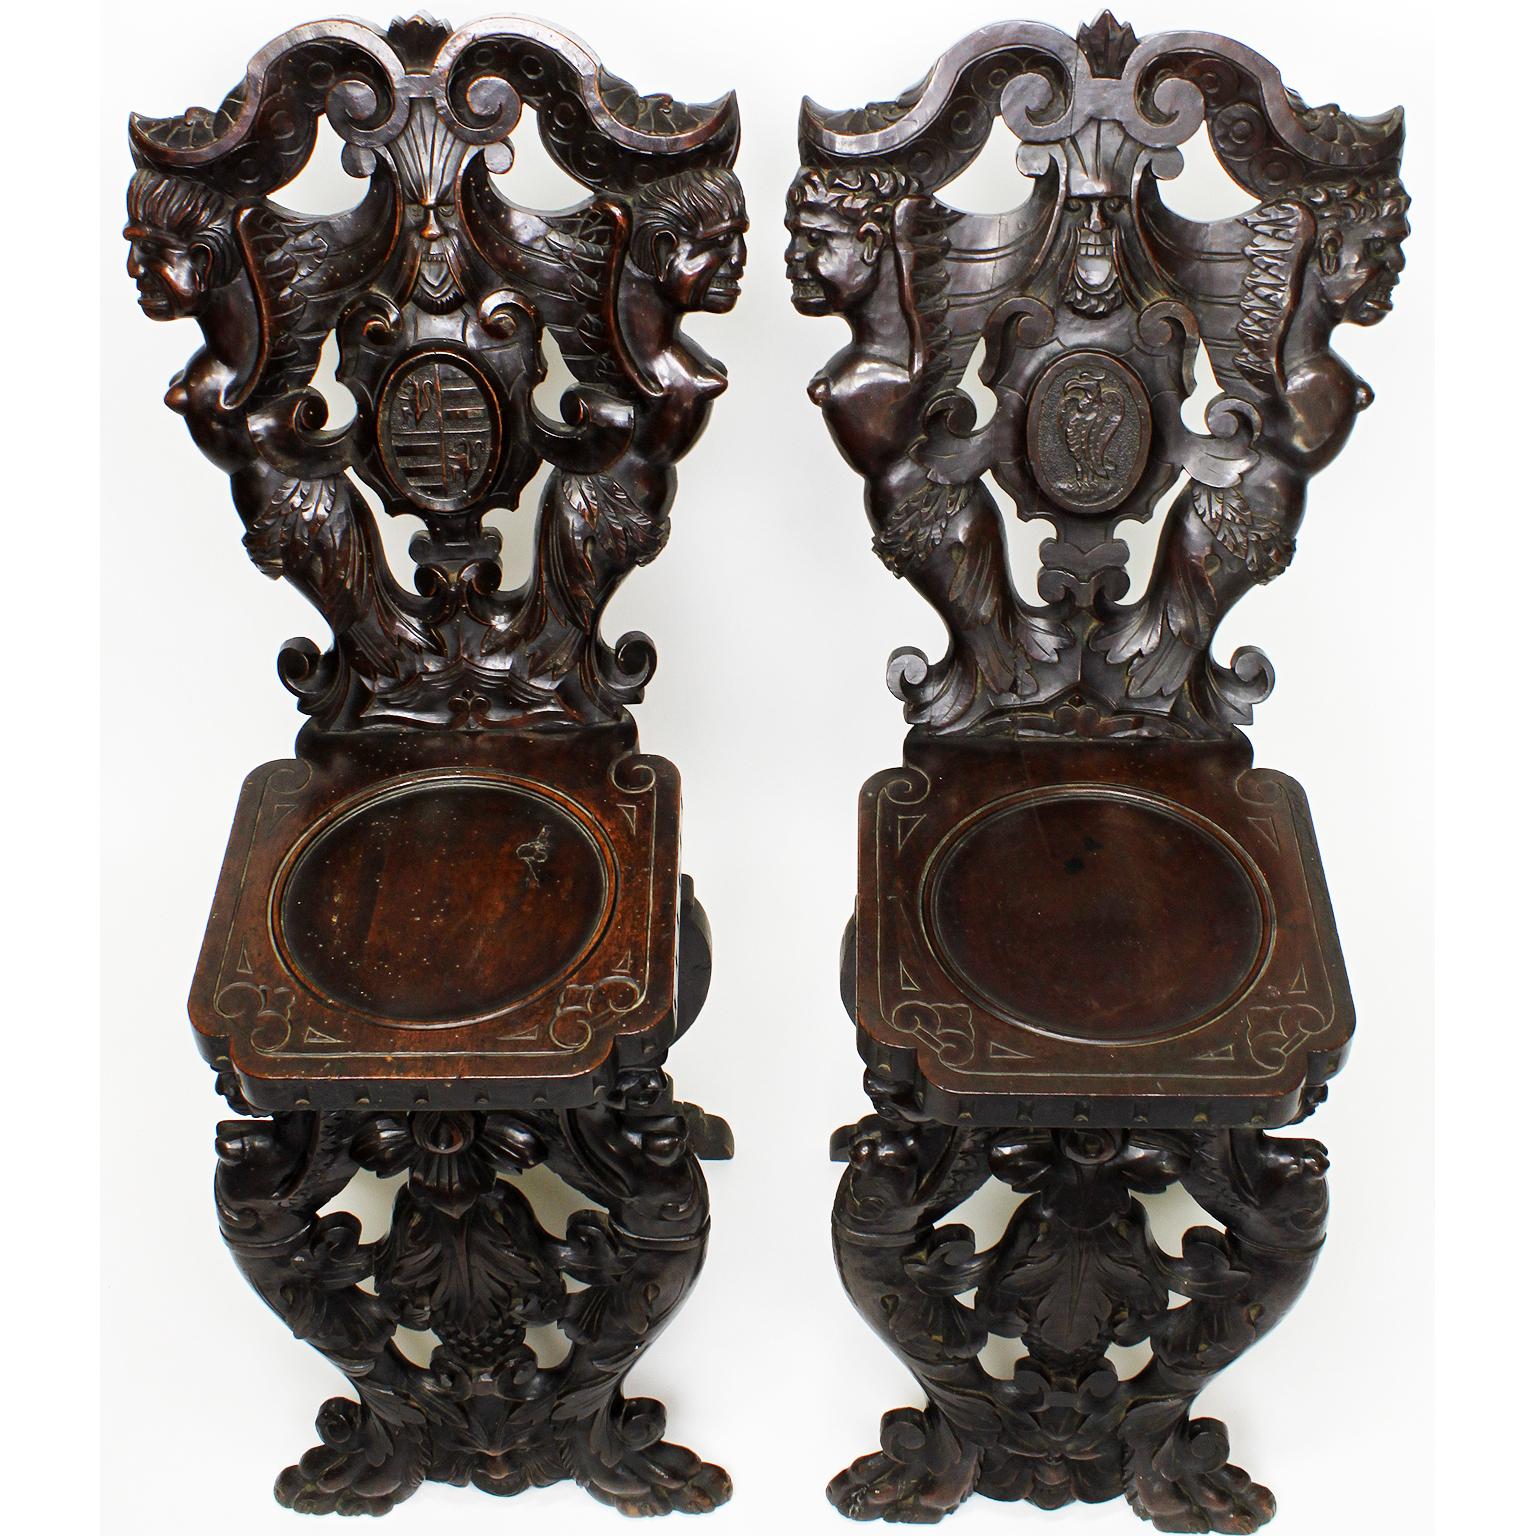 A fine pair of Italian 19th century Baroque Revival style carved walnut Sgabello figural side-chairs, each backrest with carvings of winged male figures, the base with female figures, raised on with paw feet, Florence, circa 1880.

Measures: